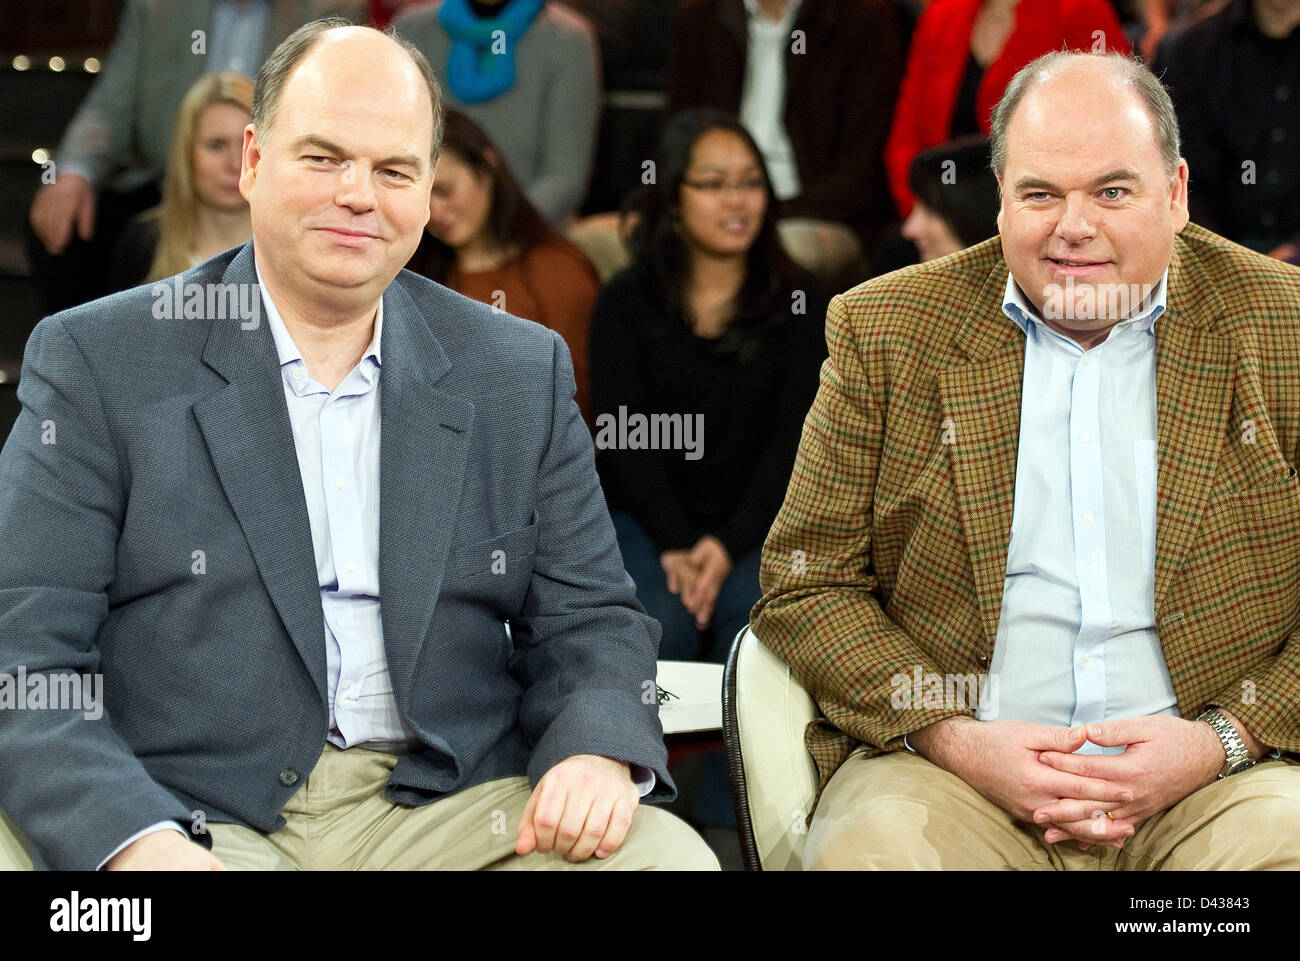 Peter (L) and Walter Kohl, sons of former German chancellor Helmut Kohl, appear on the German TV talk show Markus Lanz in Hamburg, Germany, 28 March 2013. Photo: Axel Heimken Stock Photo